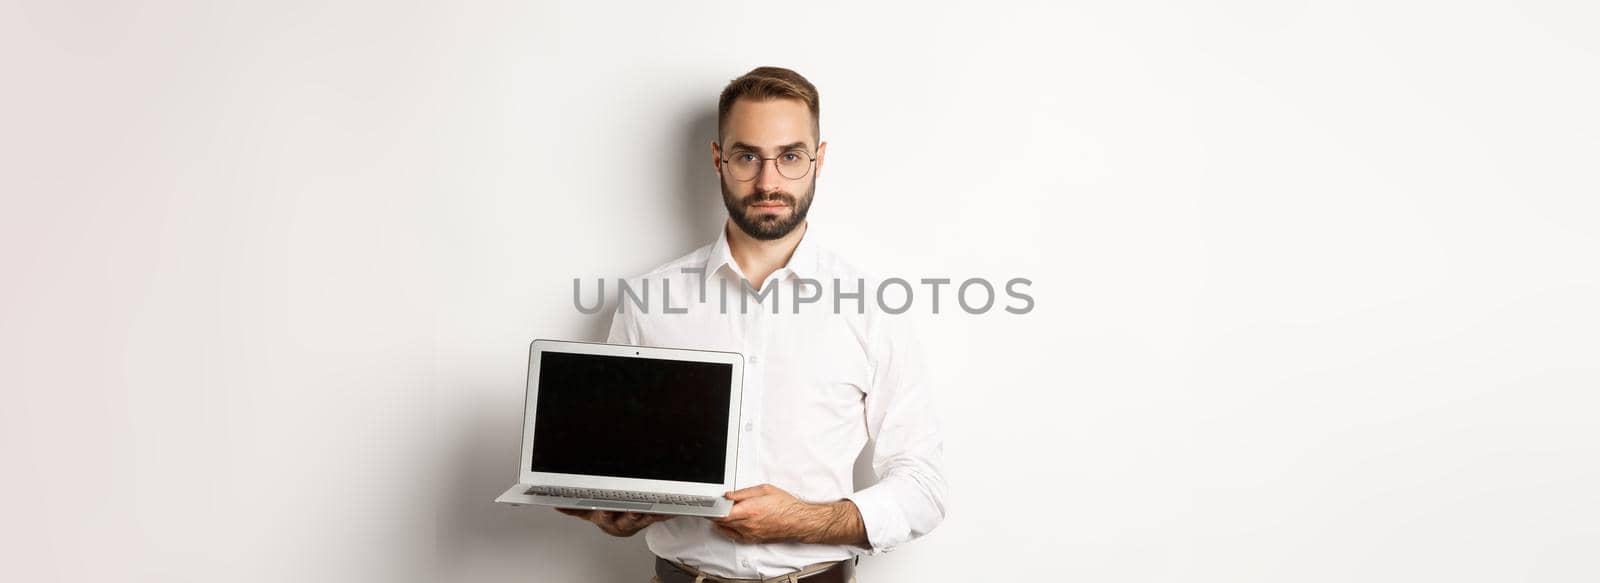 Confident manager demonstrating presentation on screen, showing laptop display and looking serious, standing over white background.